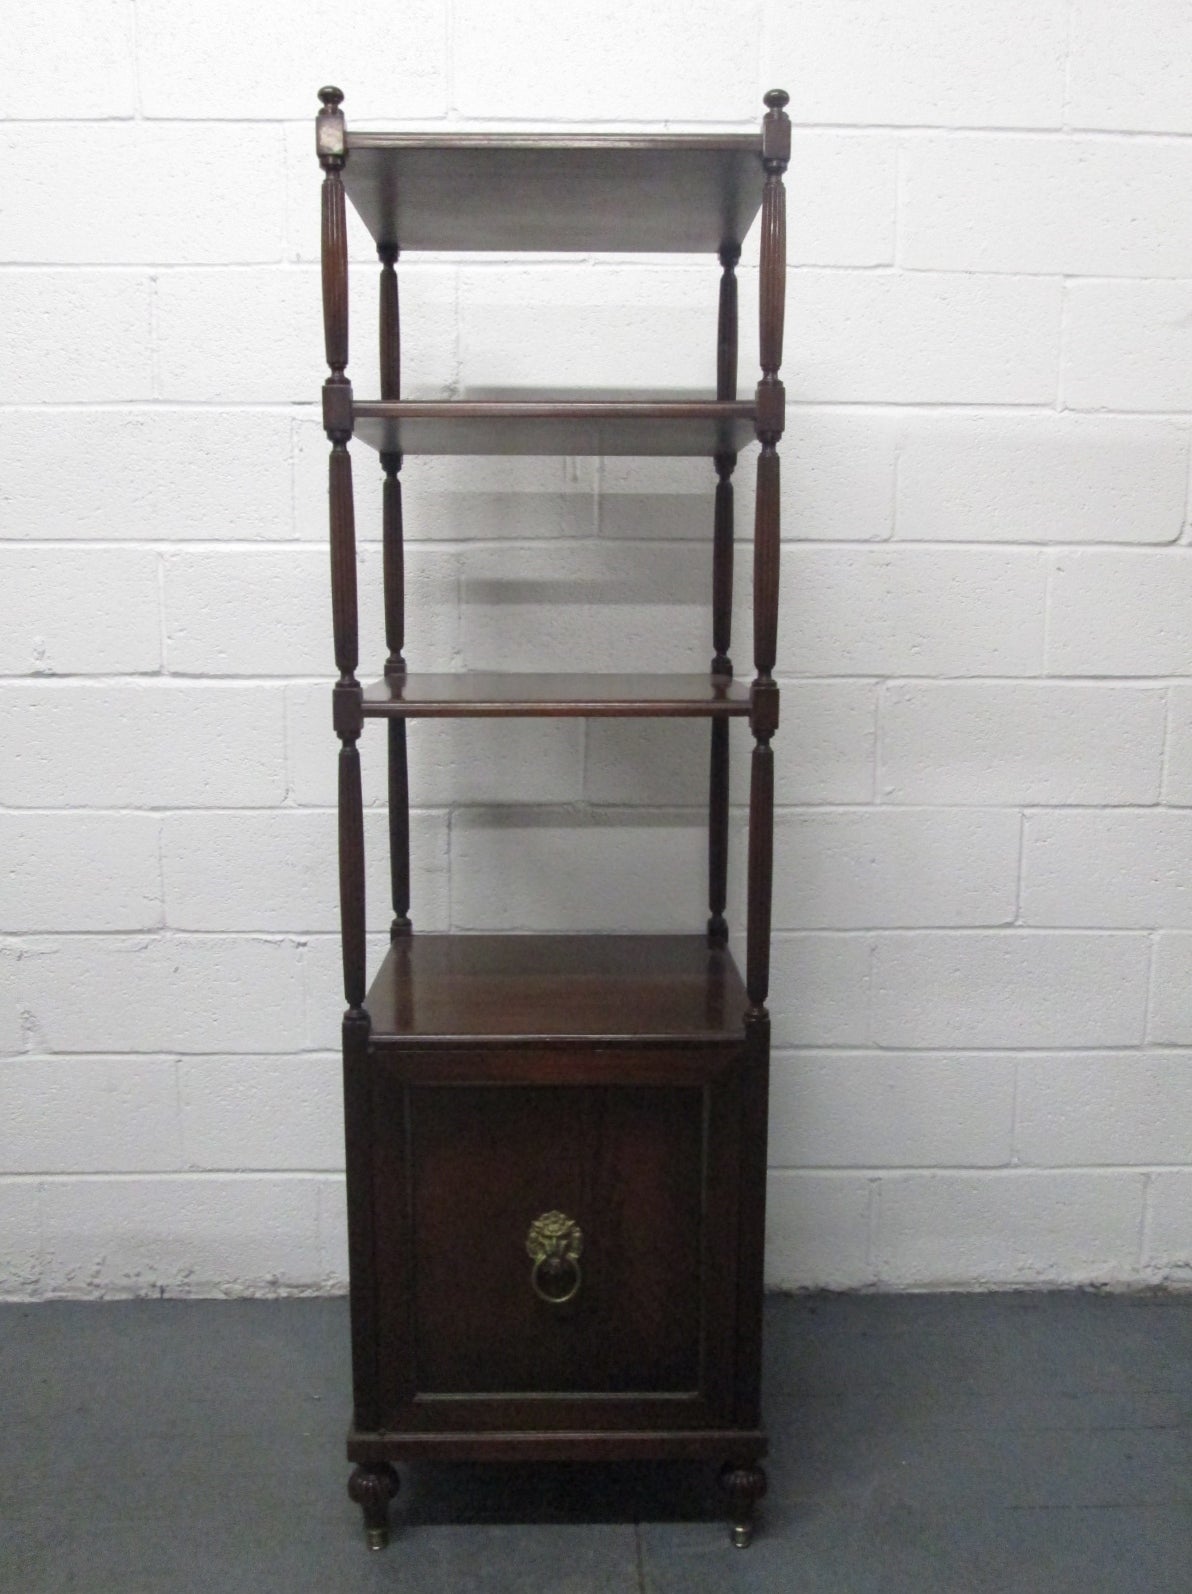 Pair of Regency style mahogany etageres. Has a cabinet underneath for storage.